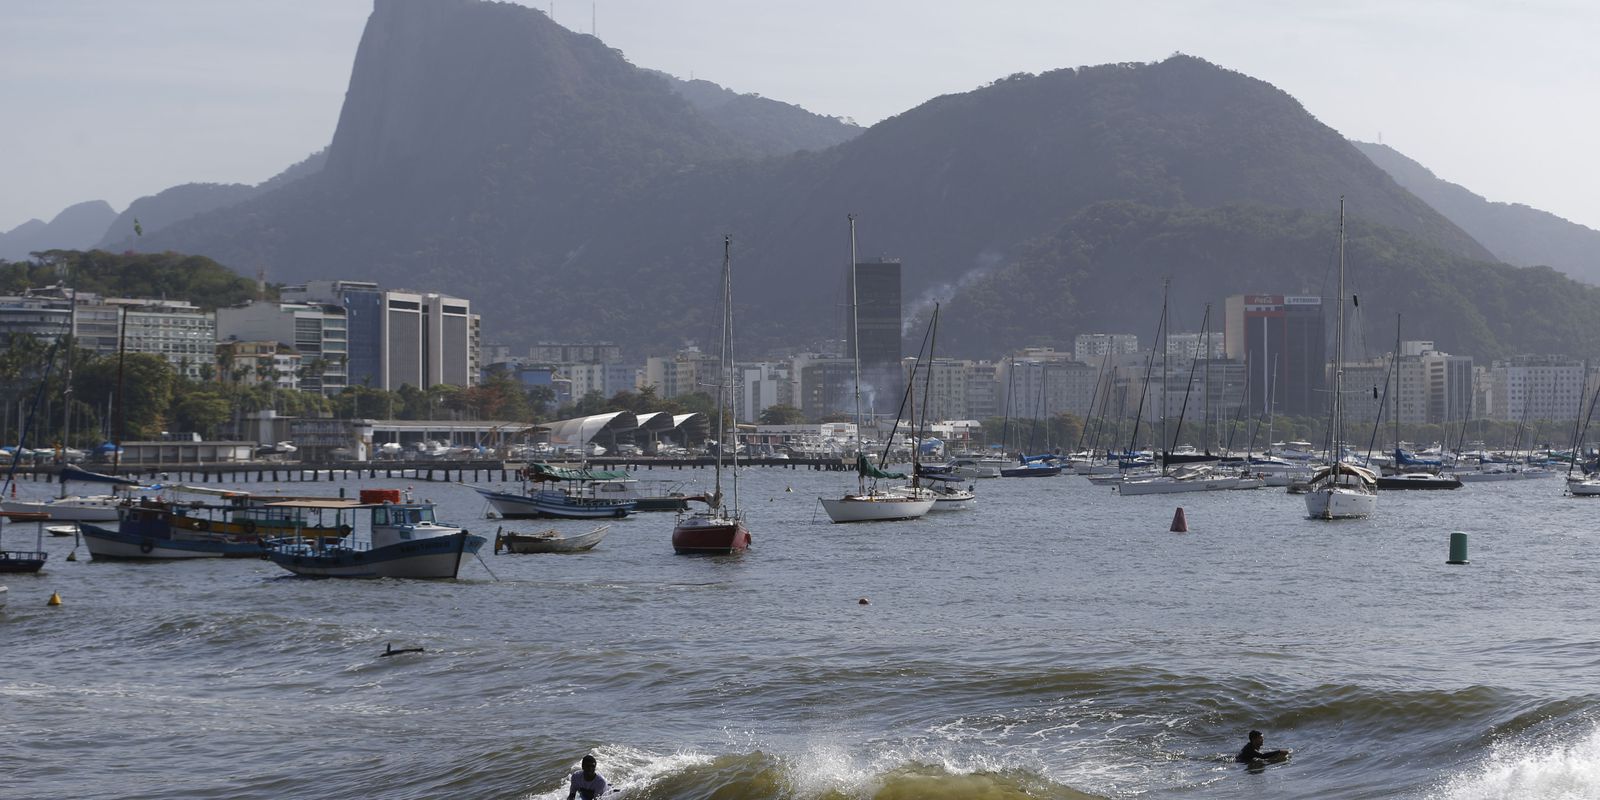 Event discusses conservation and future of Guanabara Bay